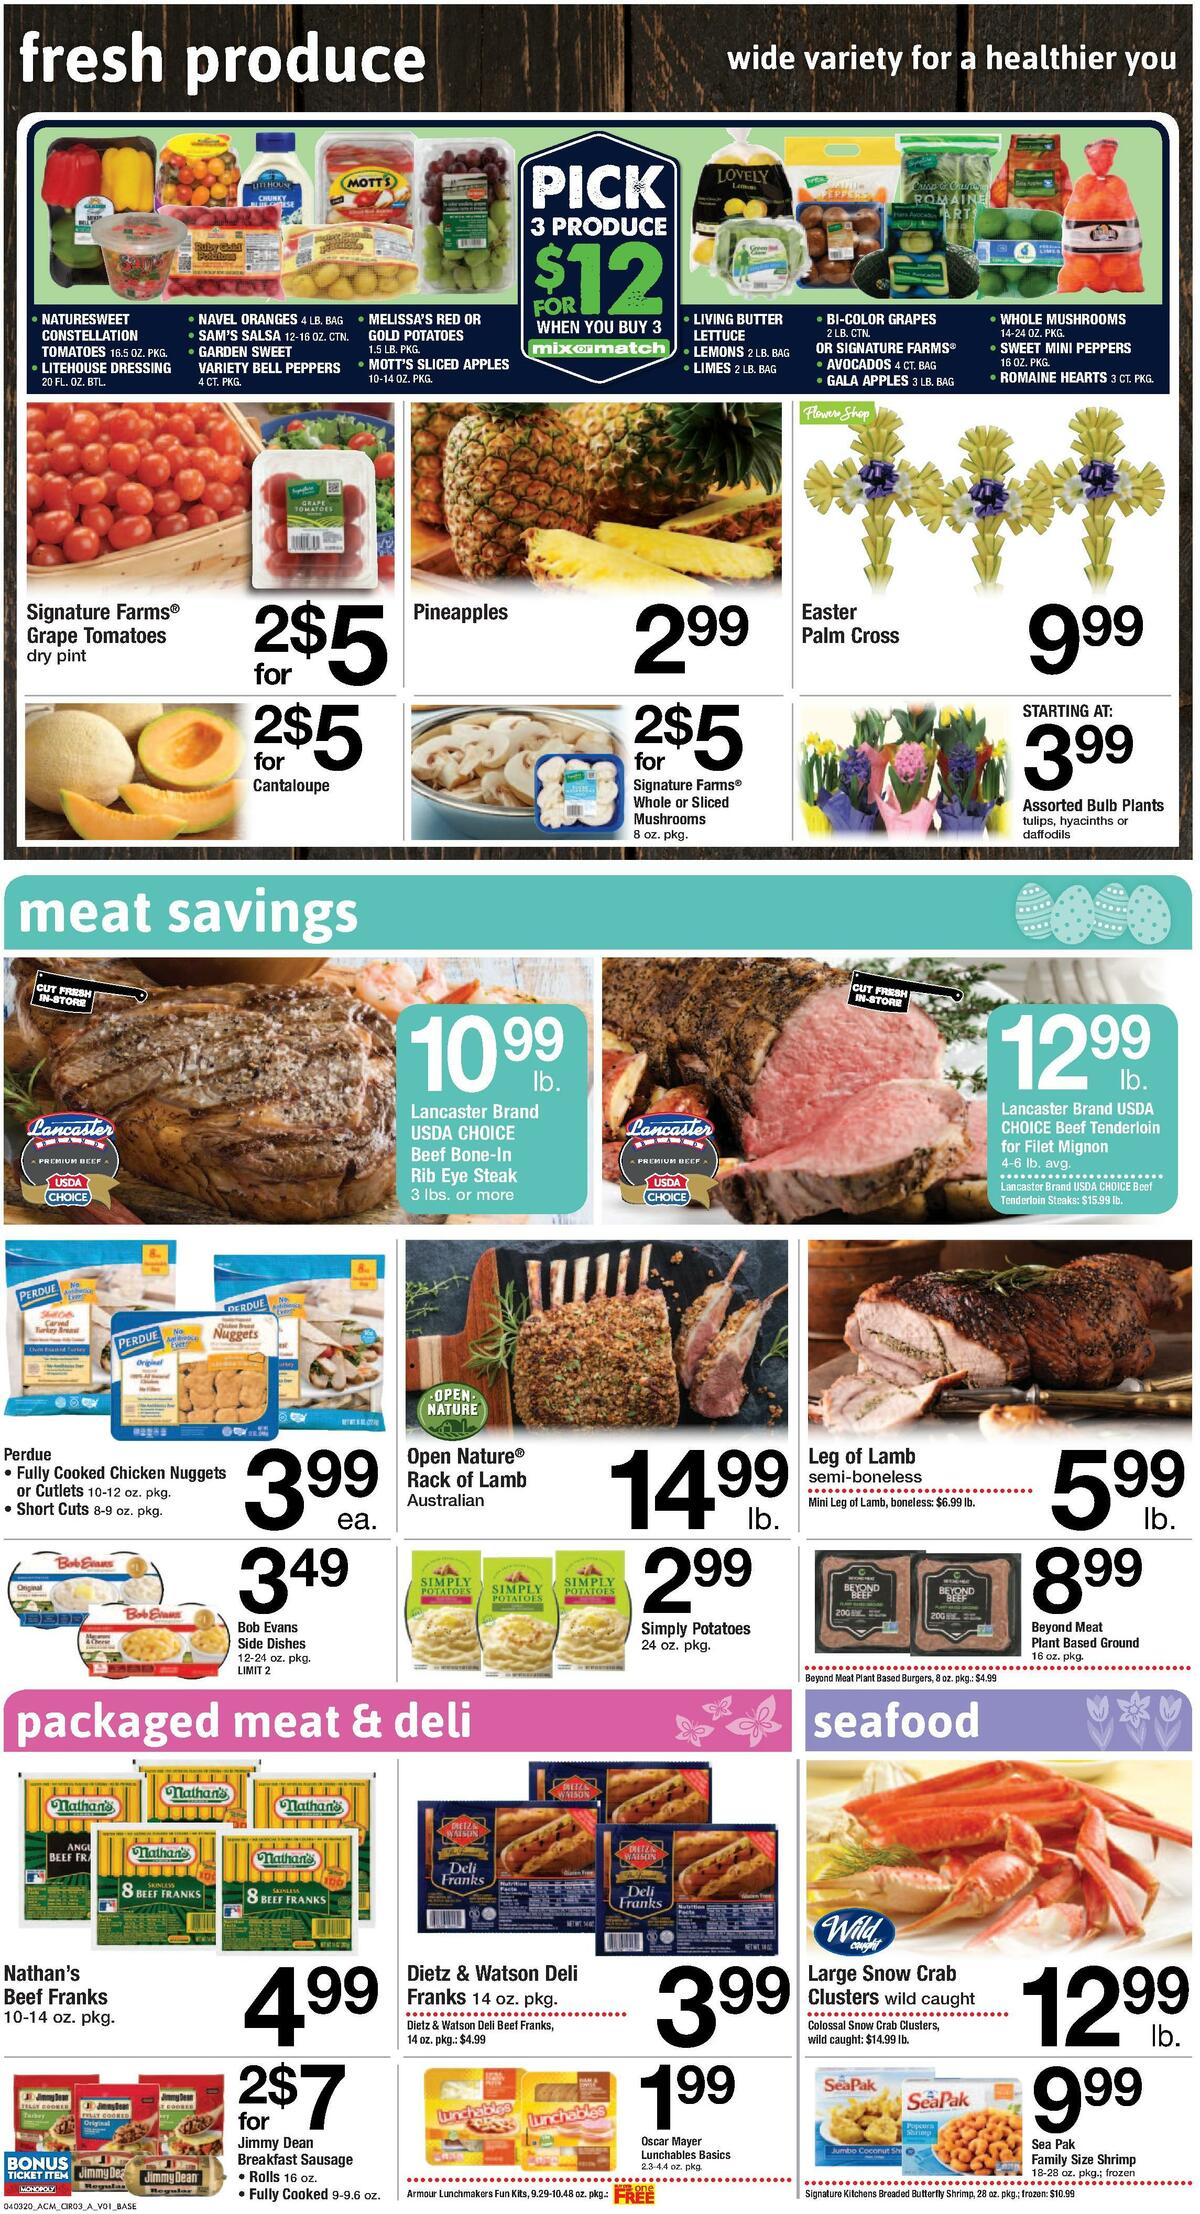 ACME Markets Weekly Ad from April 3